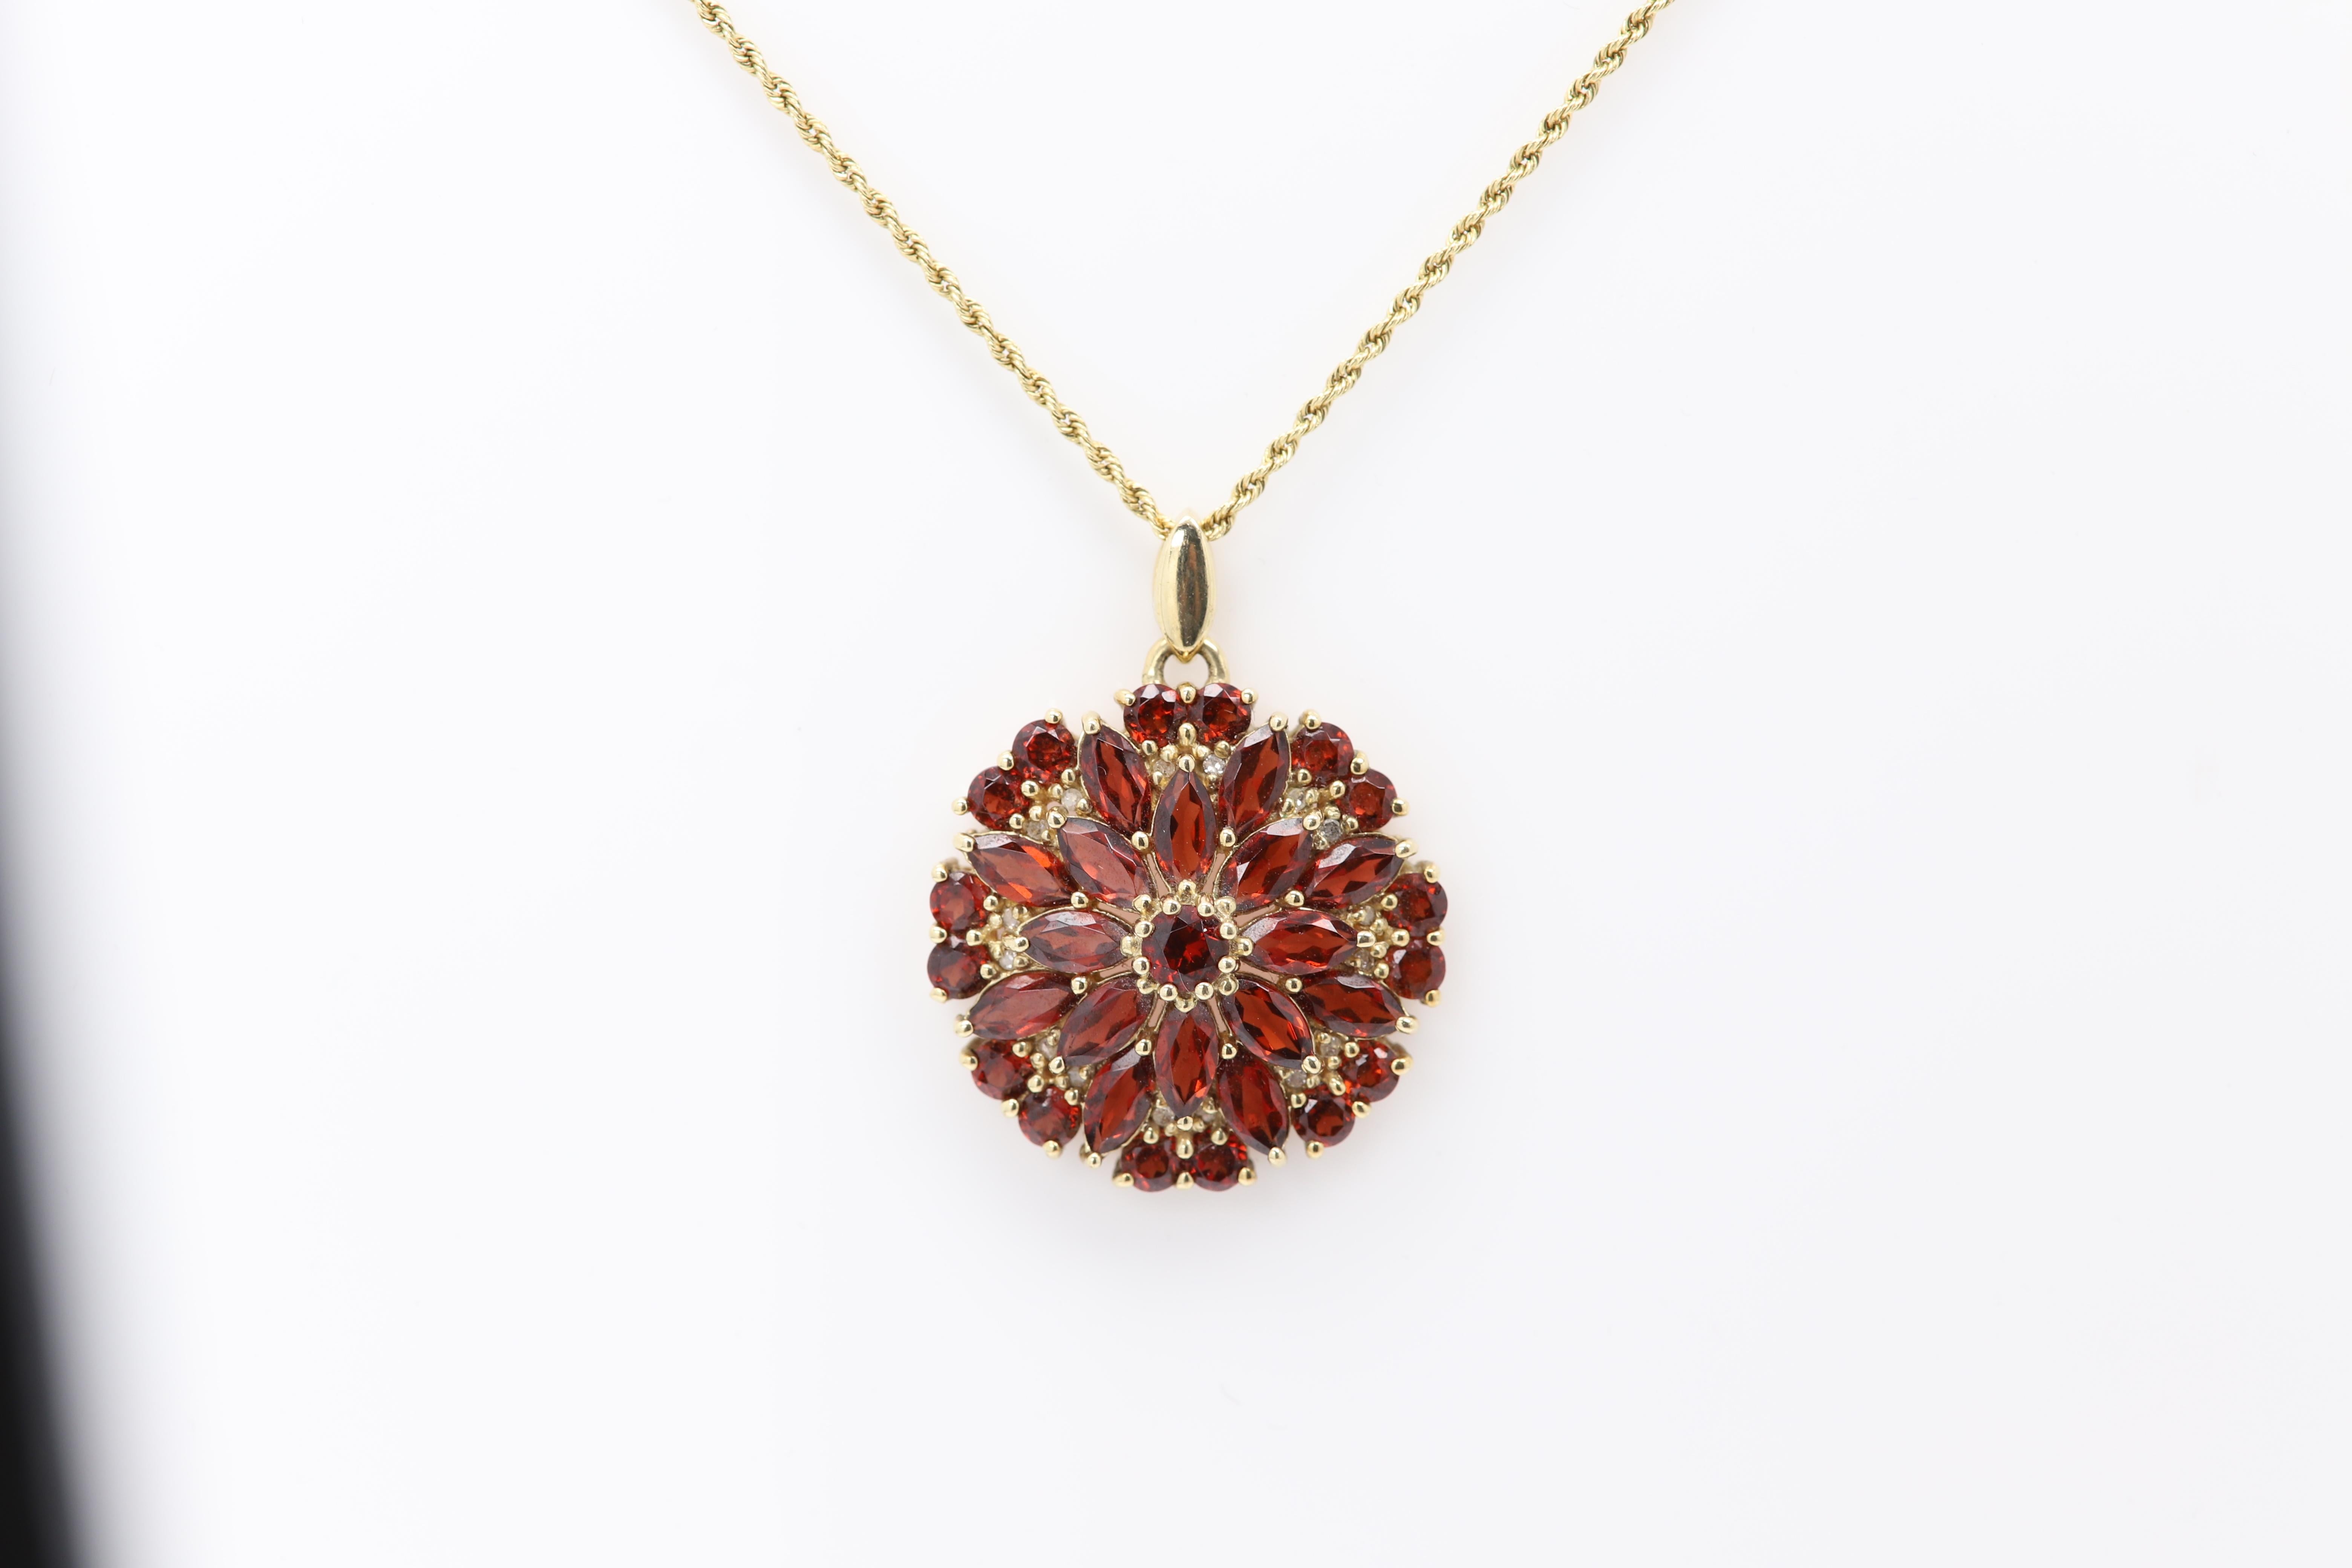 Vintage Garnet gemstone Pendant.
Brilliant Sparkling Color
Made from 10k yellow gold 
weight with the chain is approx 8.7grams
Chain is 14k and 27' inch long
Size of pendant is approx 1' Inch
Circa 1940's
Garnet stones are Gem quality and bright